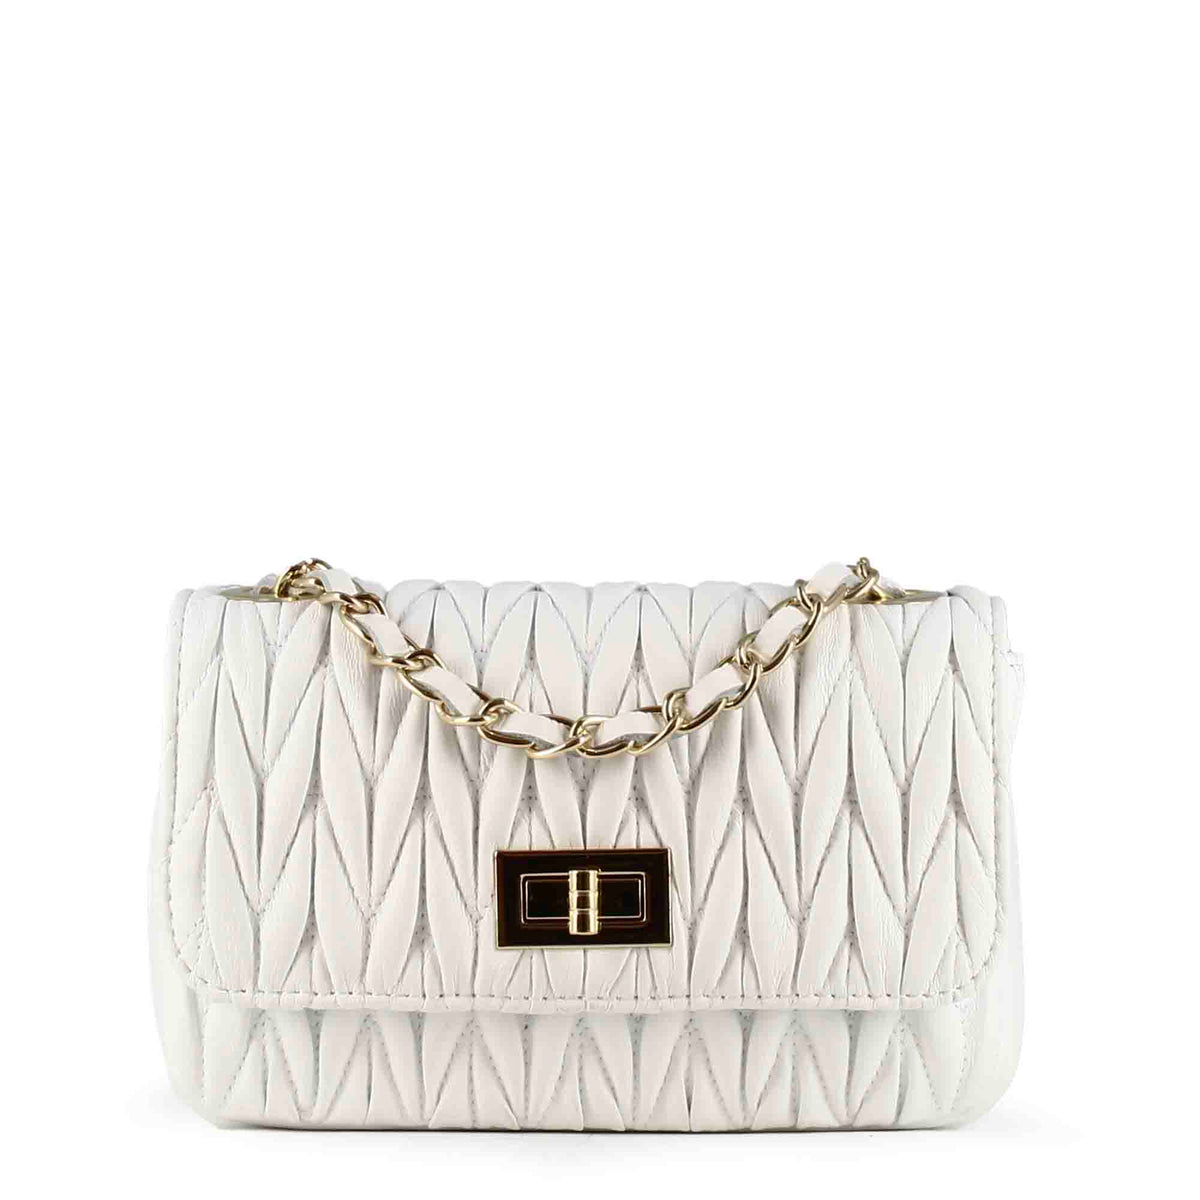 Women's handbag in white leather with jewel shoulder strap